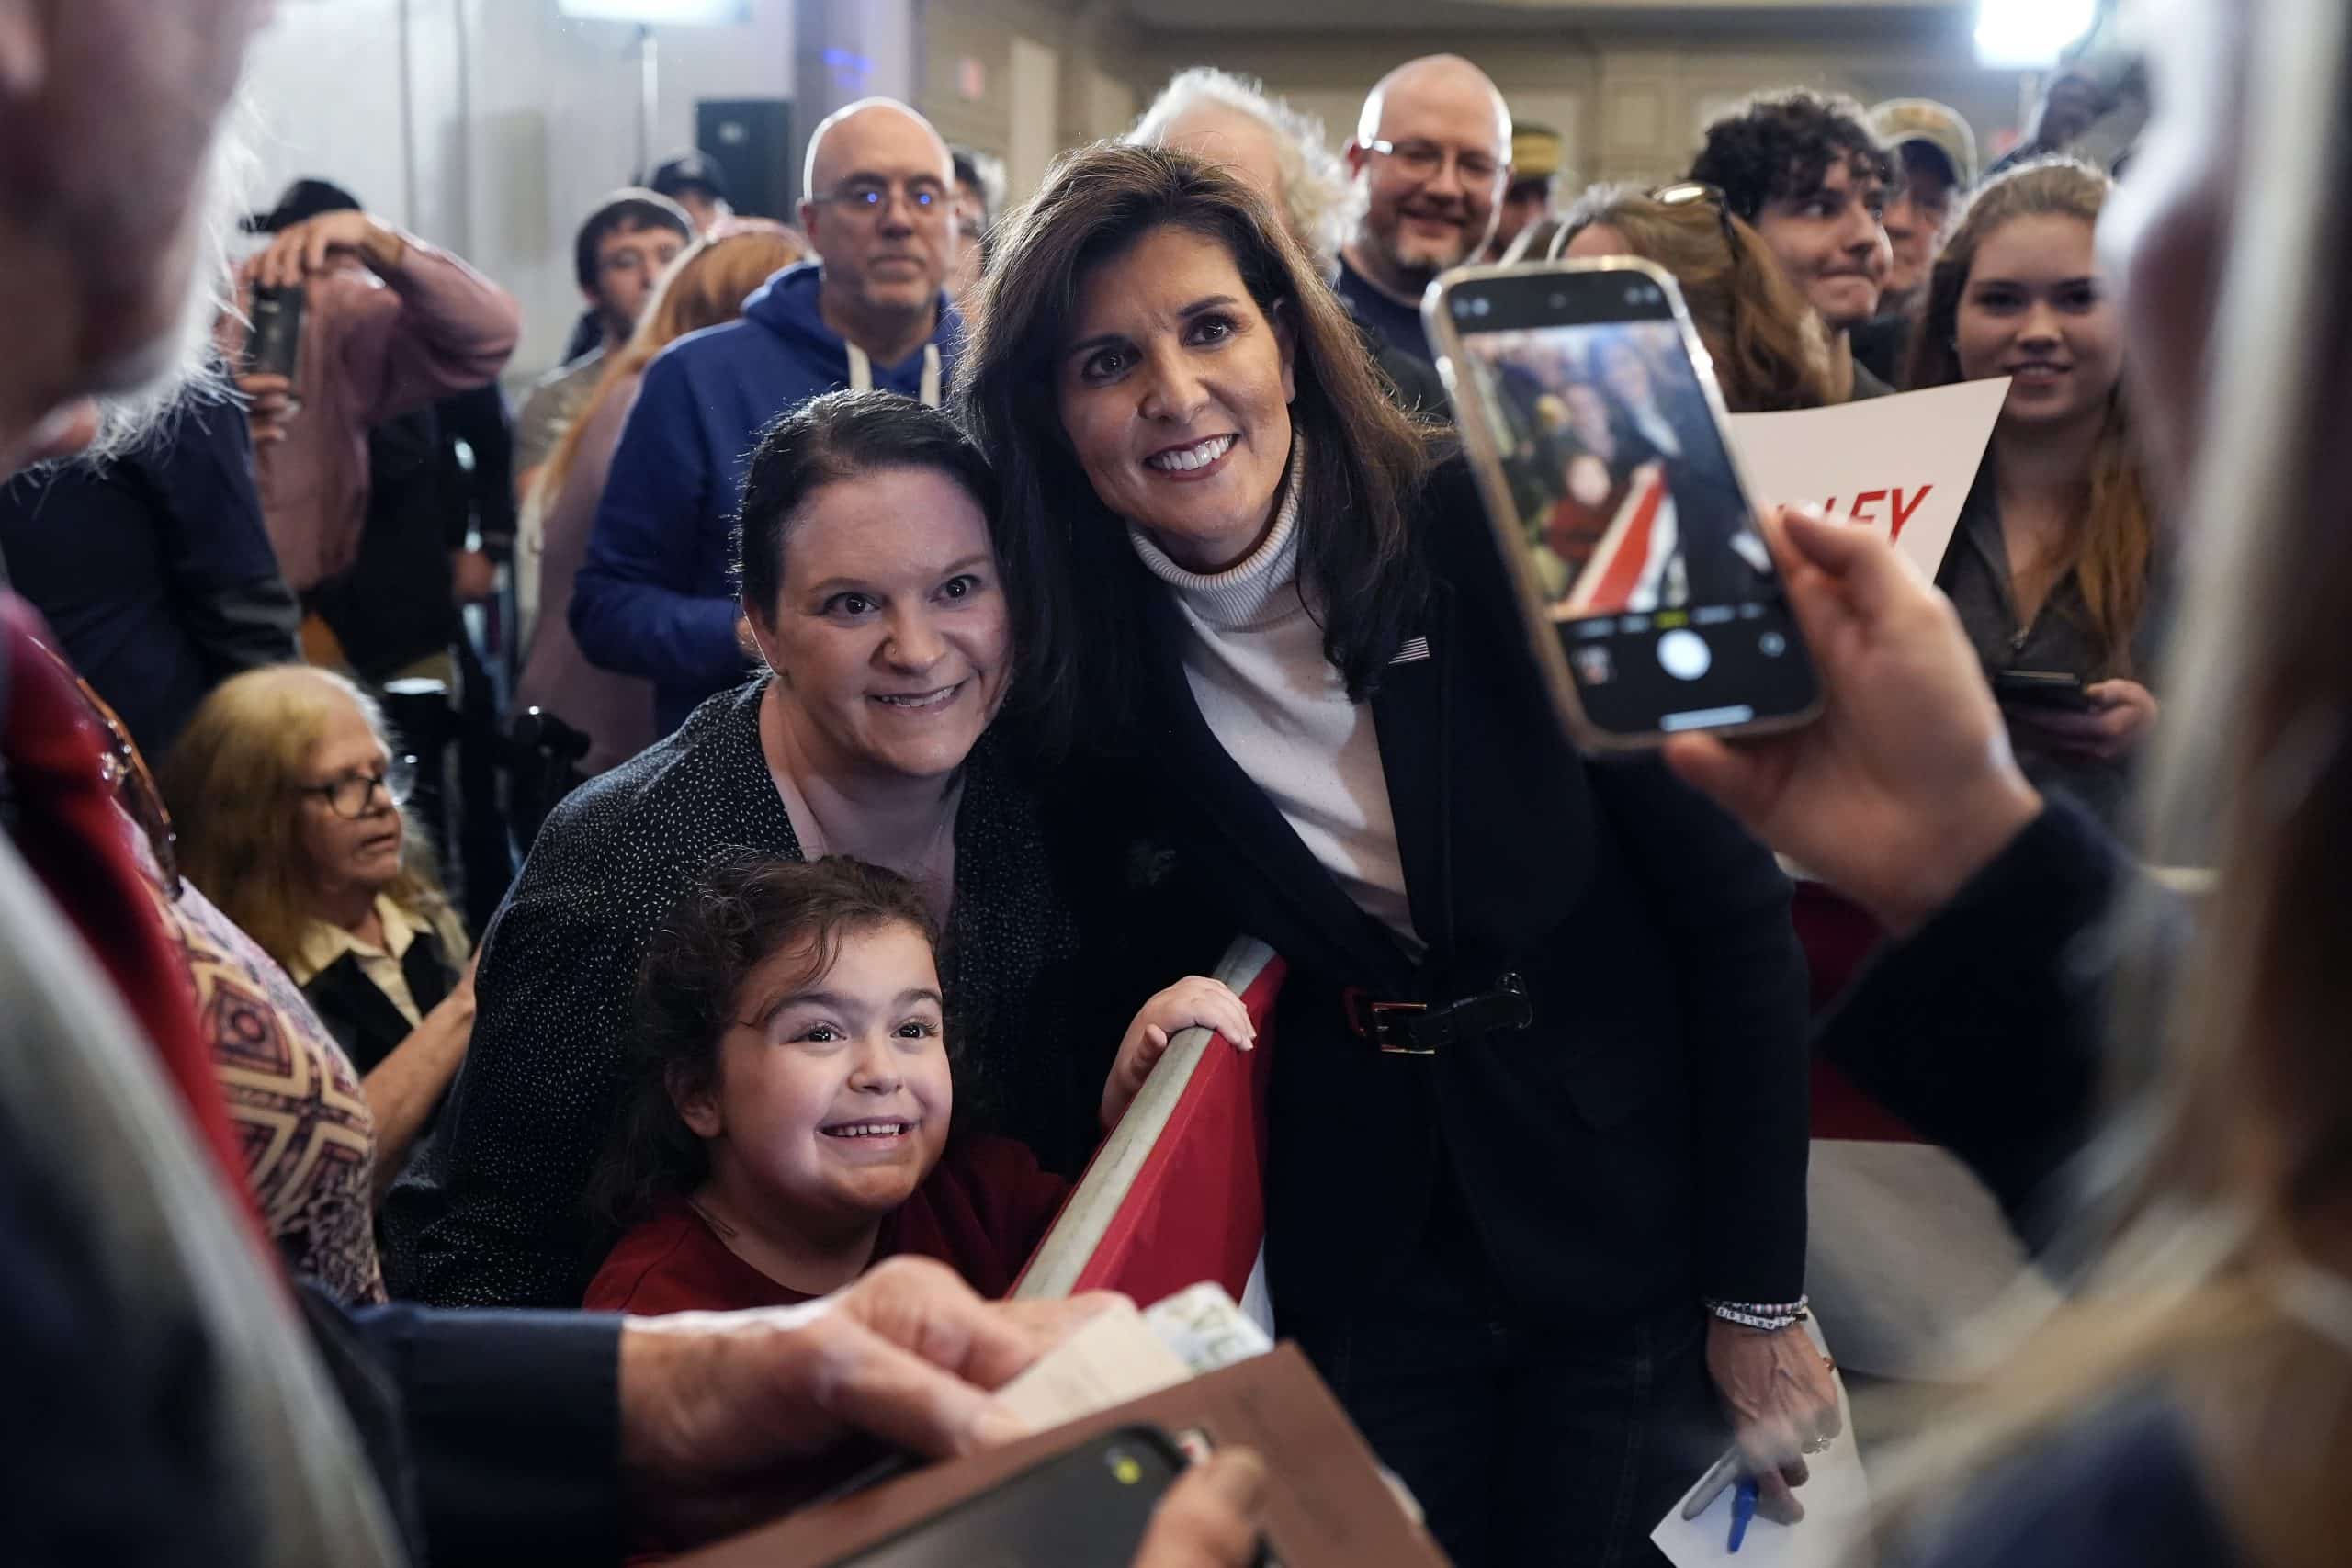 Nikki Haley wins the District of Columbia’s Republican primary and gets